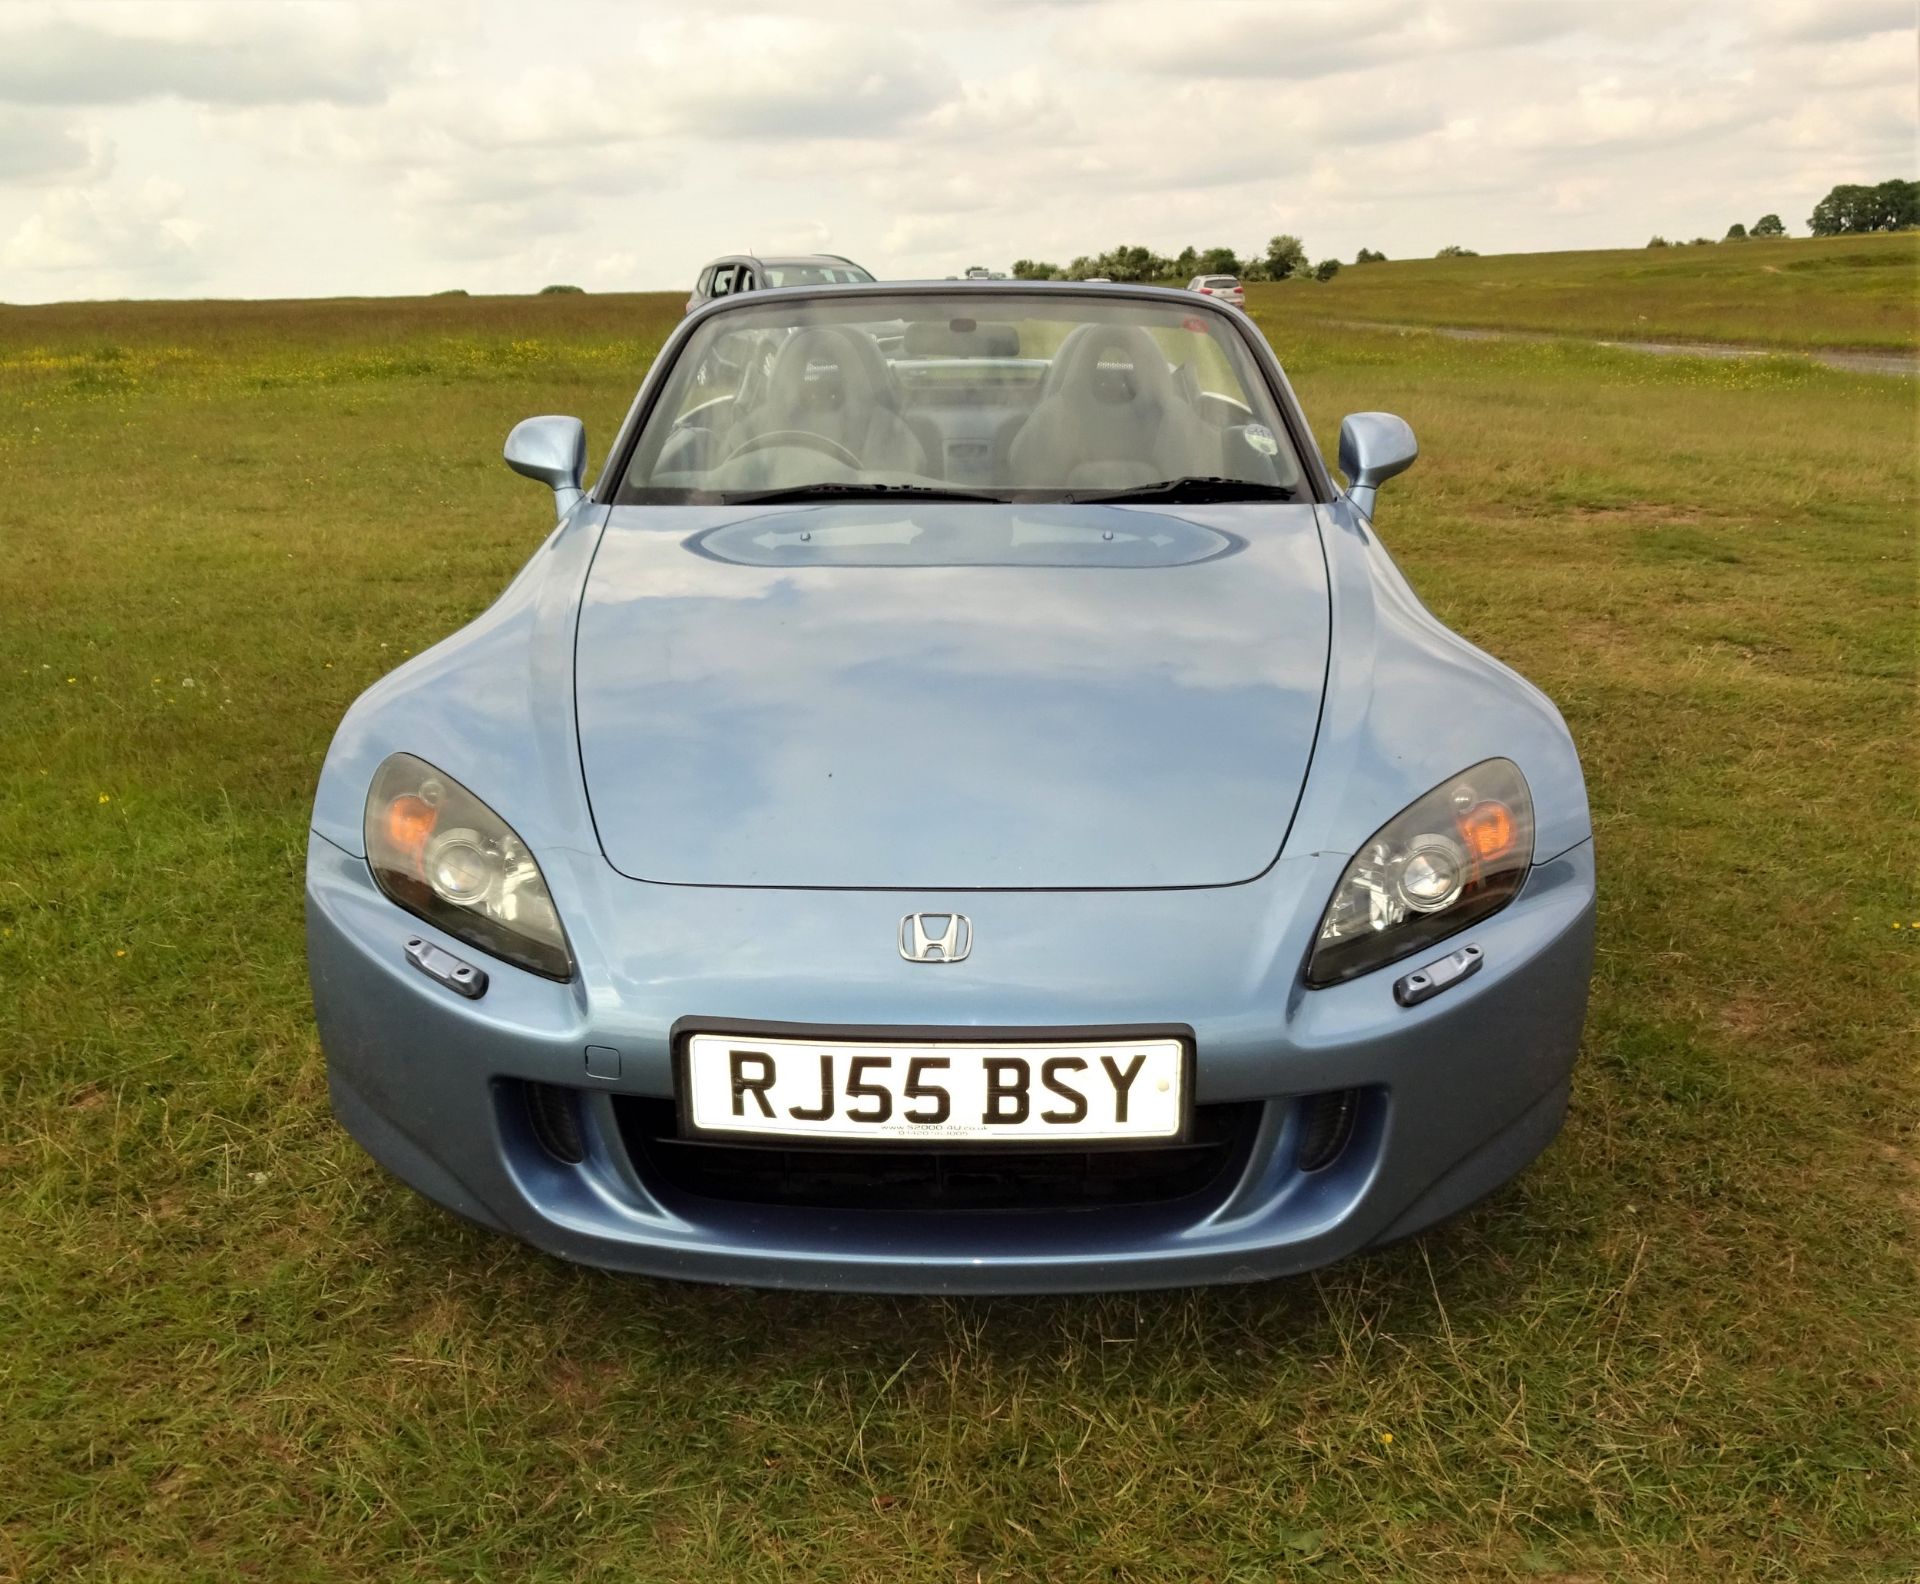 2005 HONDA S2000 Registration Number: RJ55 BSY Chassis Number: JHMPA11305S202028 - In current - Image 6 of 15